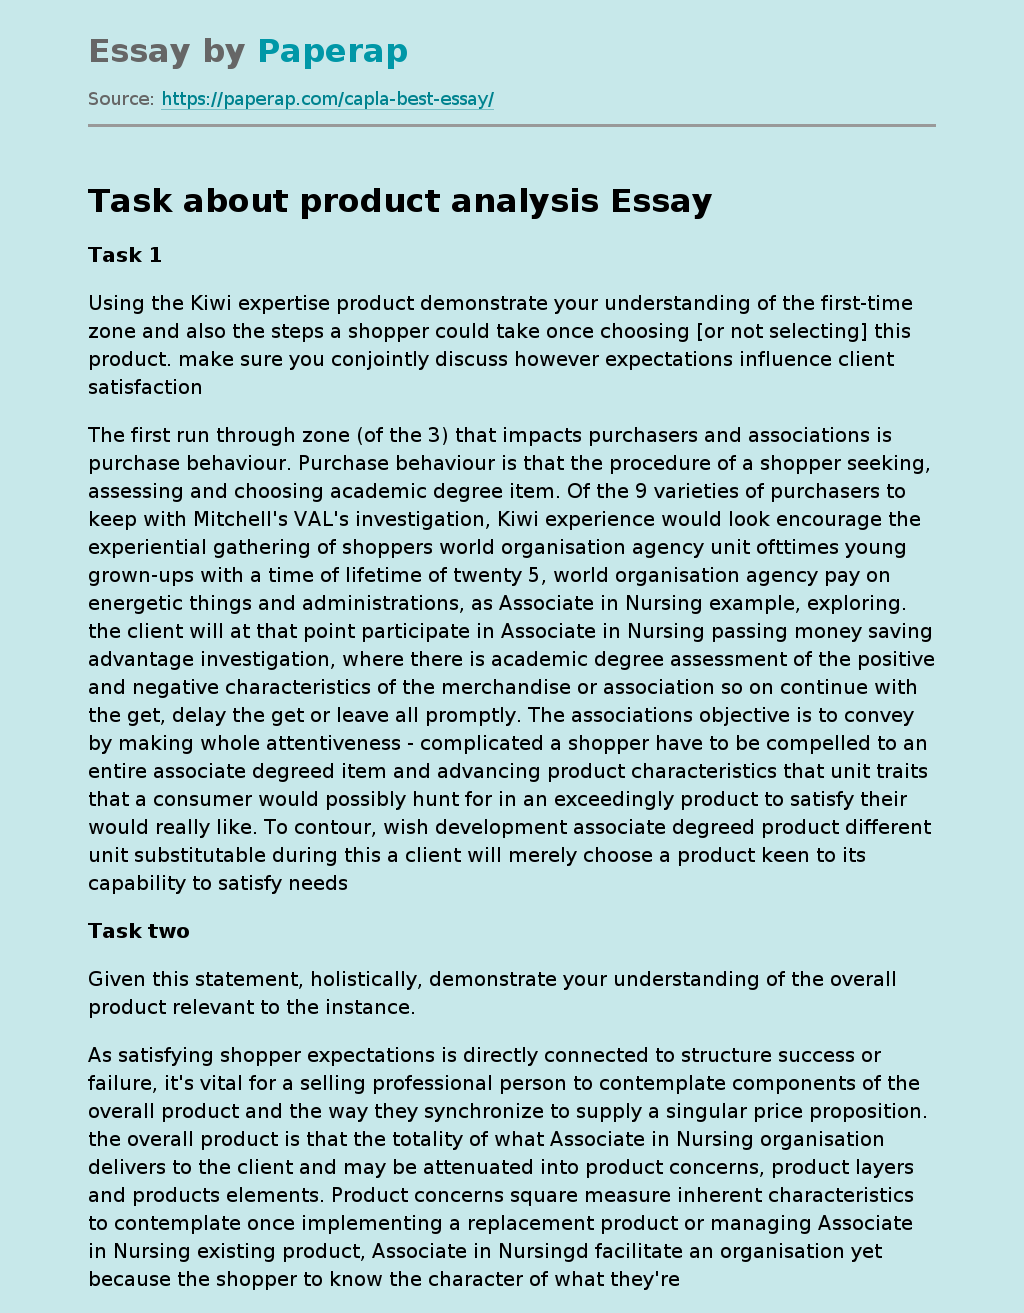 Task about product analysis